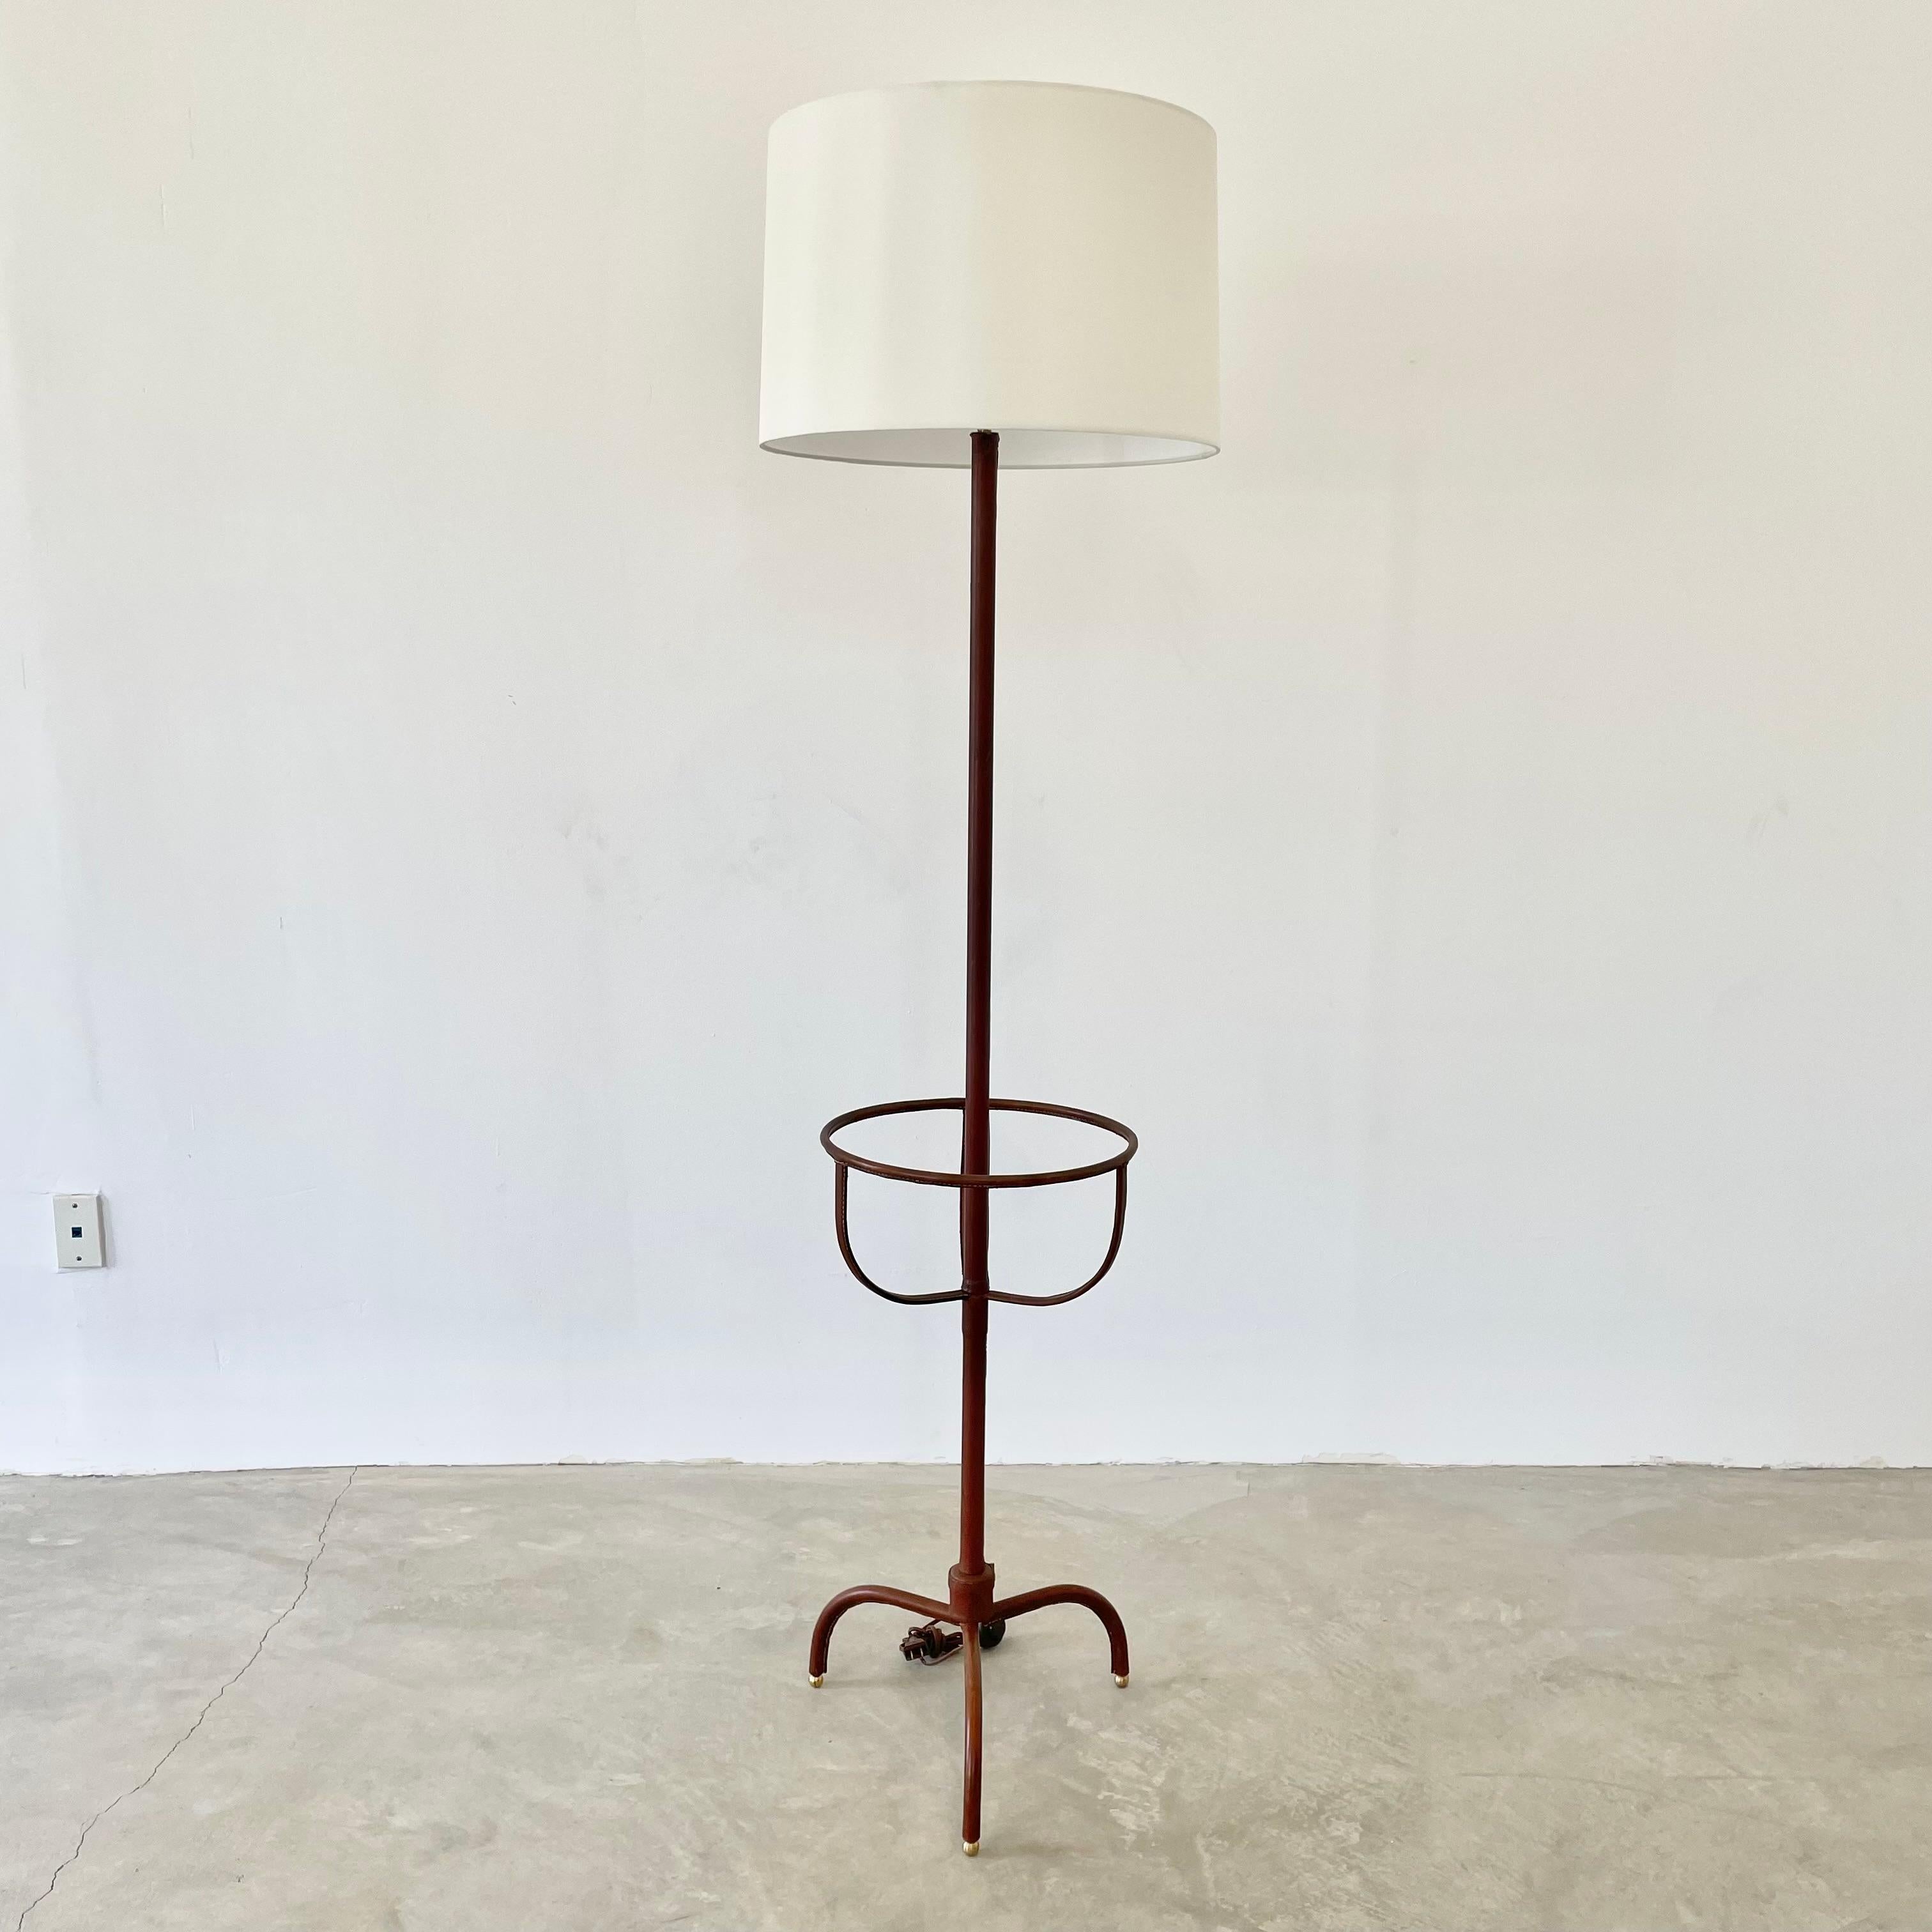 Mid-Century Modern Jacques Adnet Floor Lamp in Saddle Leather, 1950s France For Sale